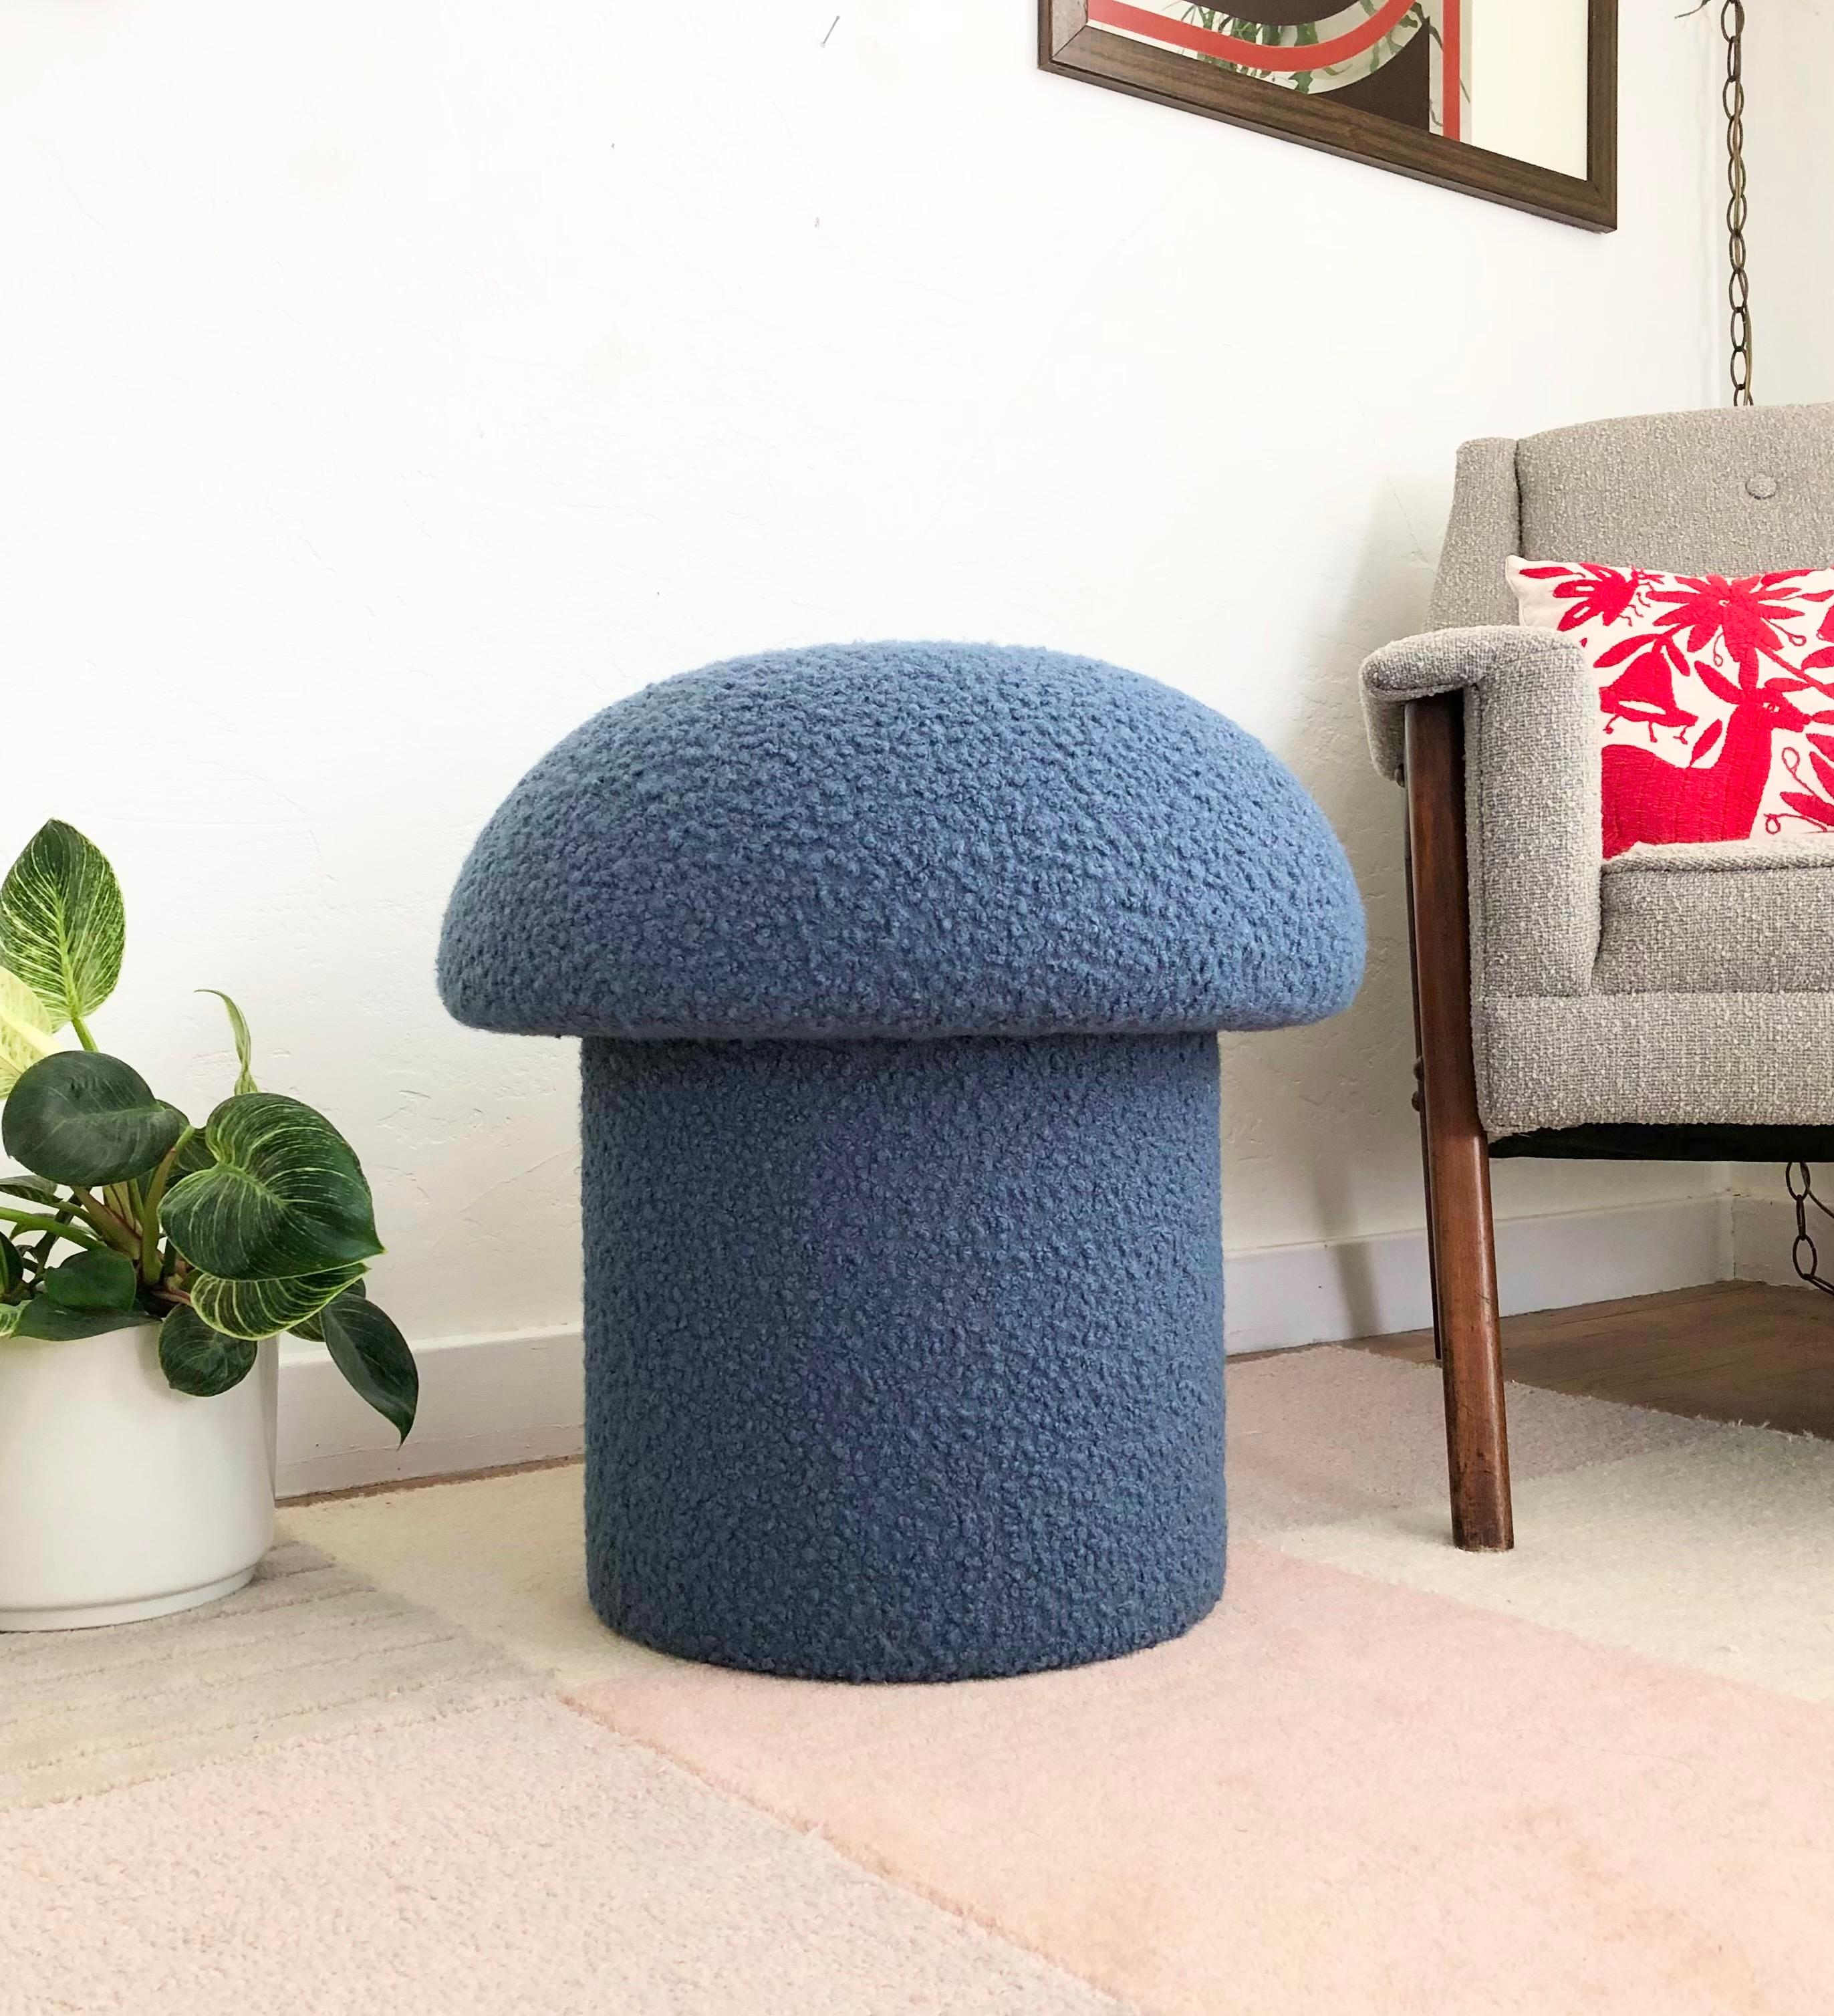 A handmade mushroom shaped ottoman, upholstered in a denim blue colored curly boucle fabric. Perfect for using as a footstool or extra occasional seating. A comfortable cushioned seat and sculptural accent piece.
Mushroom ottomans are made to order,